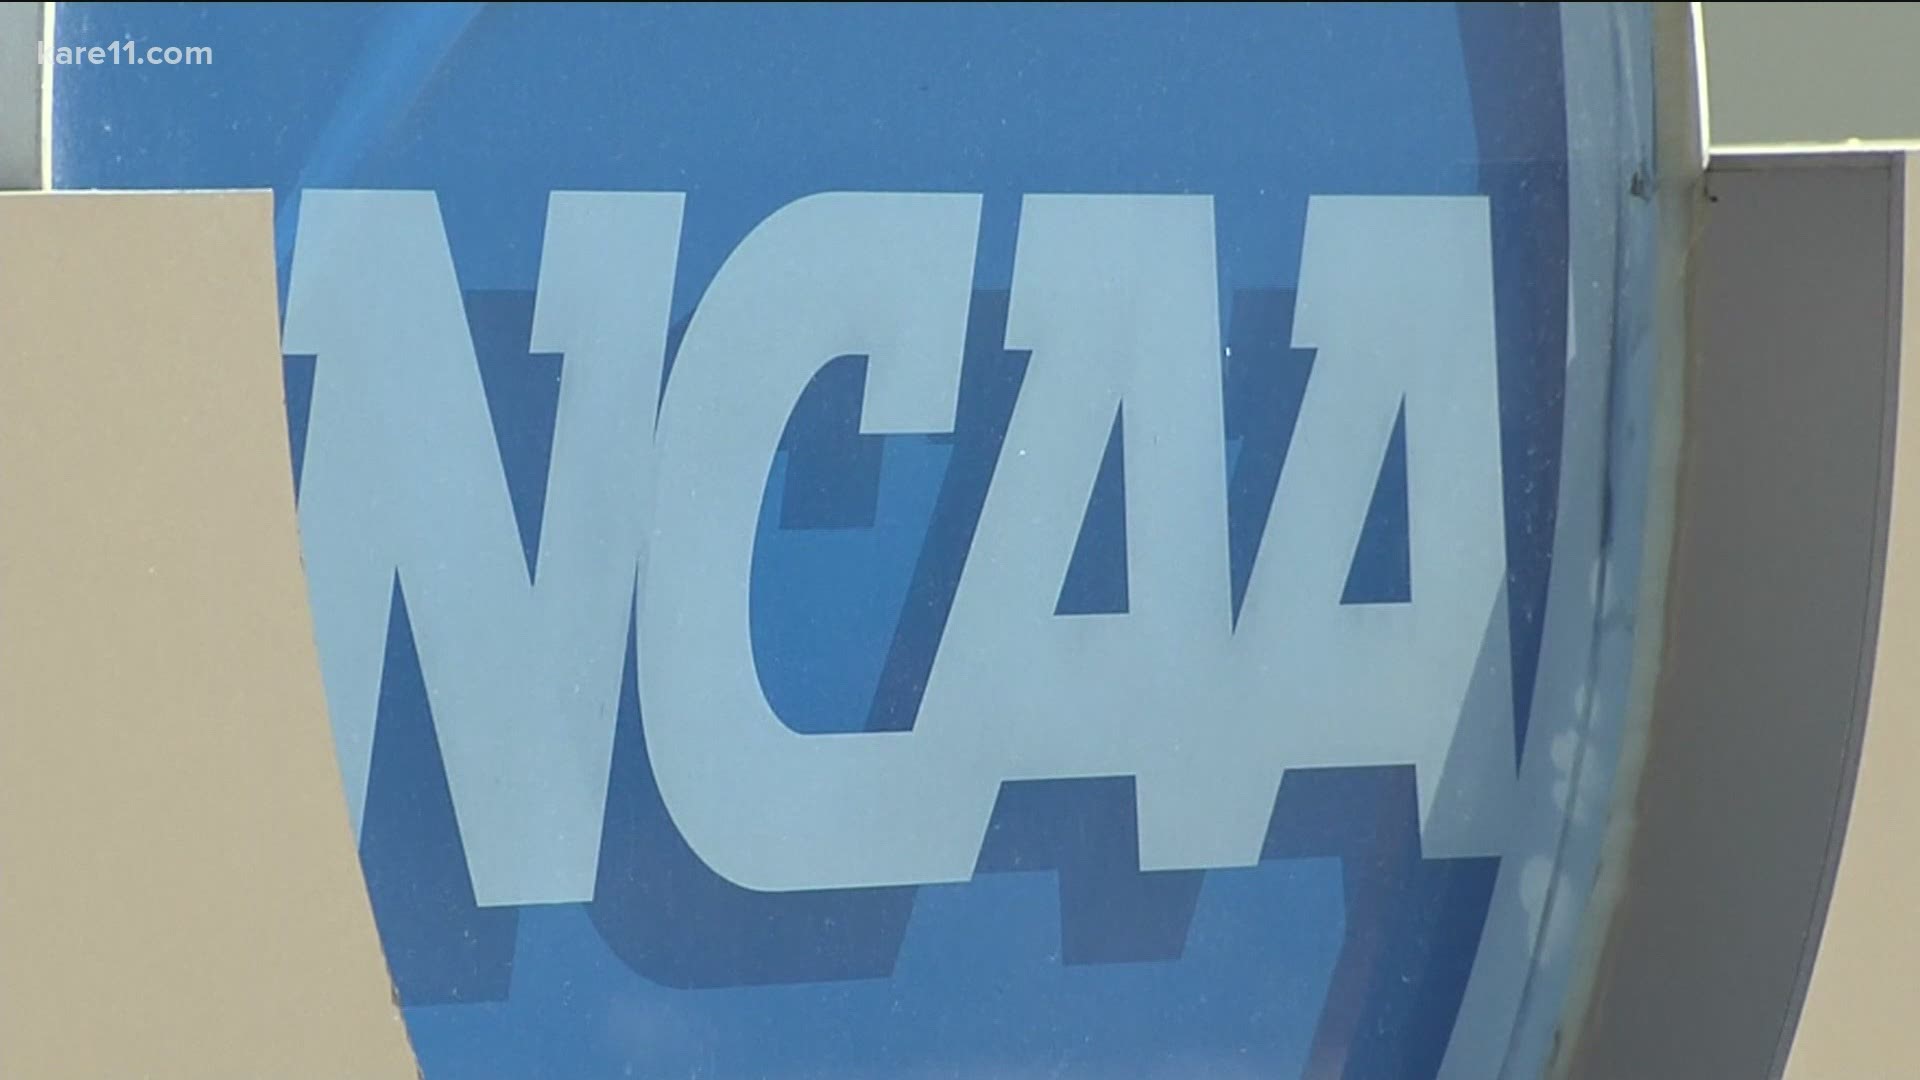 The court ruled Monday that NCAA limits on the education-related benefits colleges can offer athletes who play Division I basketball and football can't be enforced.